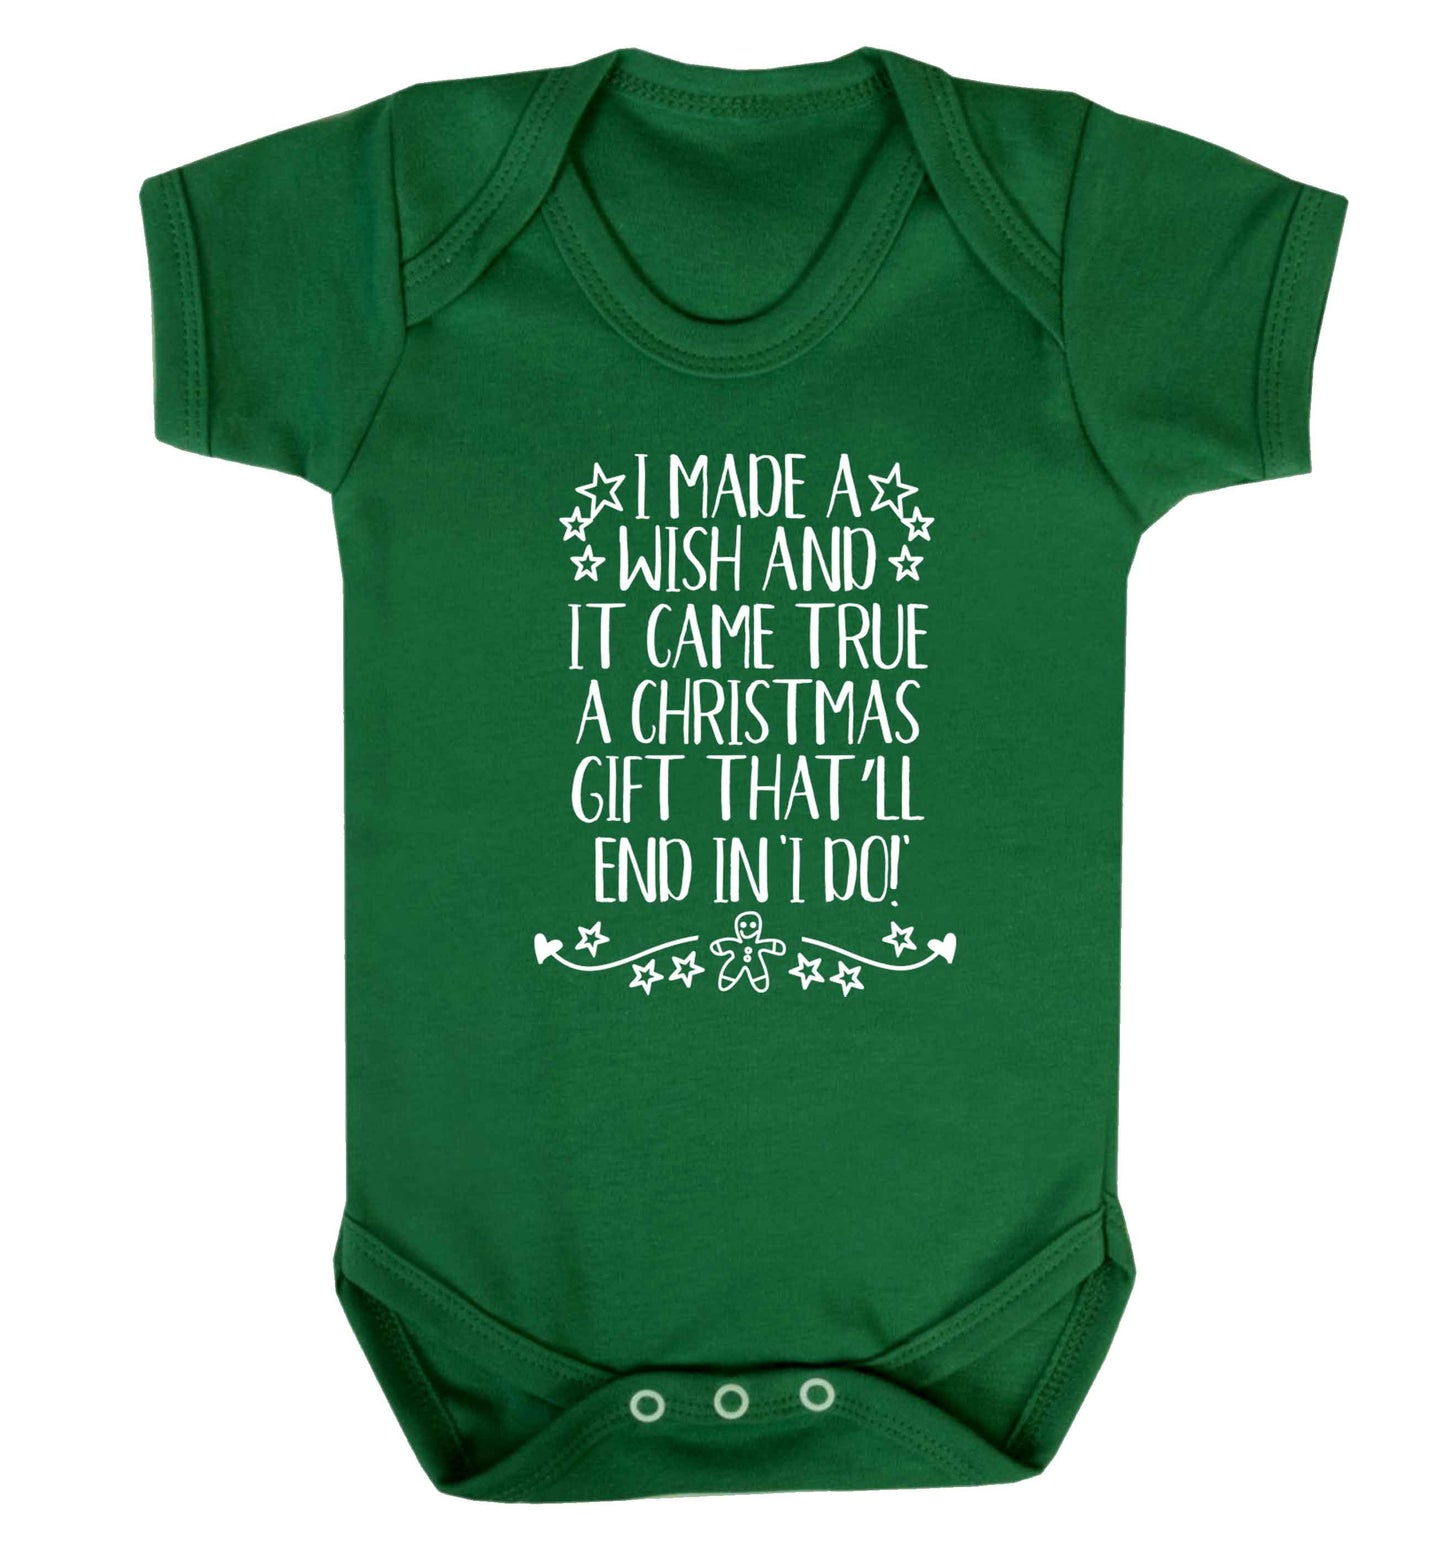 I made a wish and it came true a Christmas gift that'll end in 'I do' Baby Vest green 18-24 months